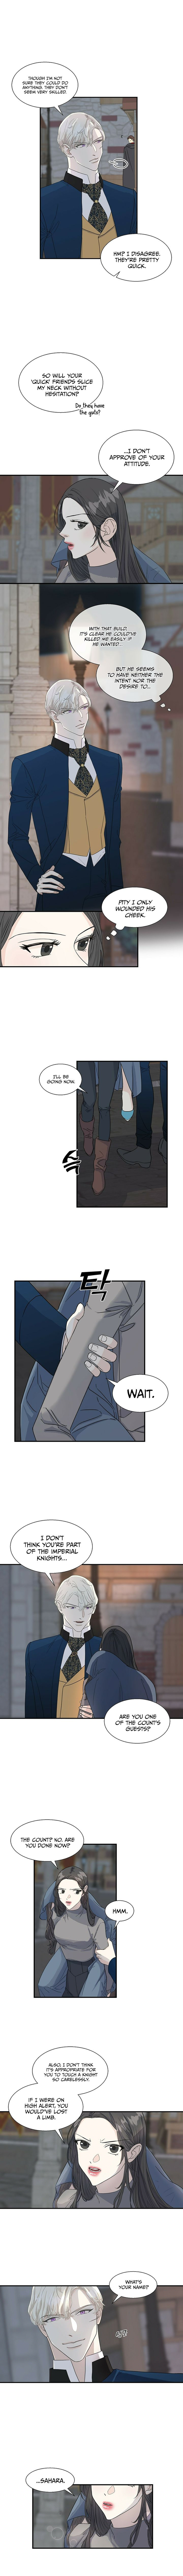 Crows Like Shiny Things - 4 page 6